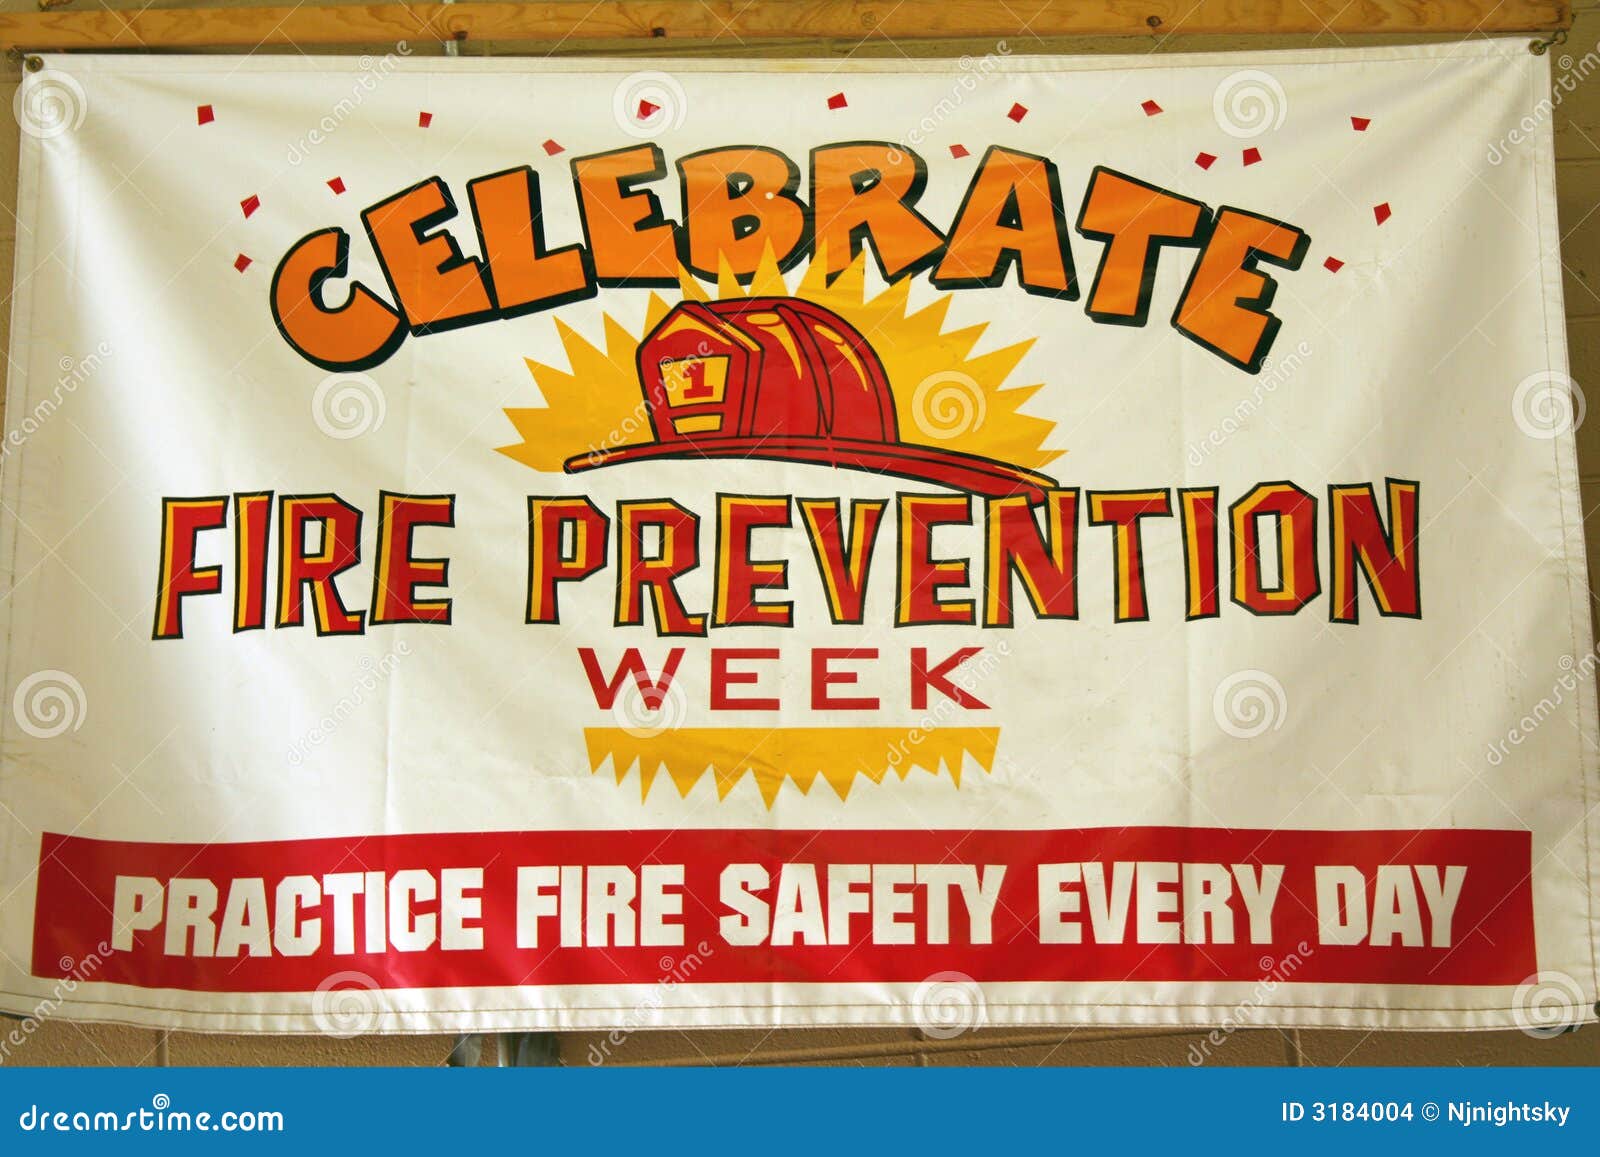 fire prevention week sign